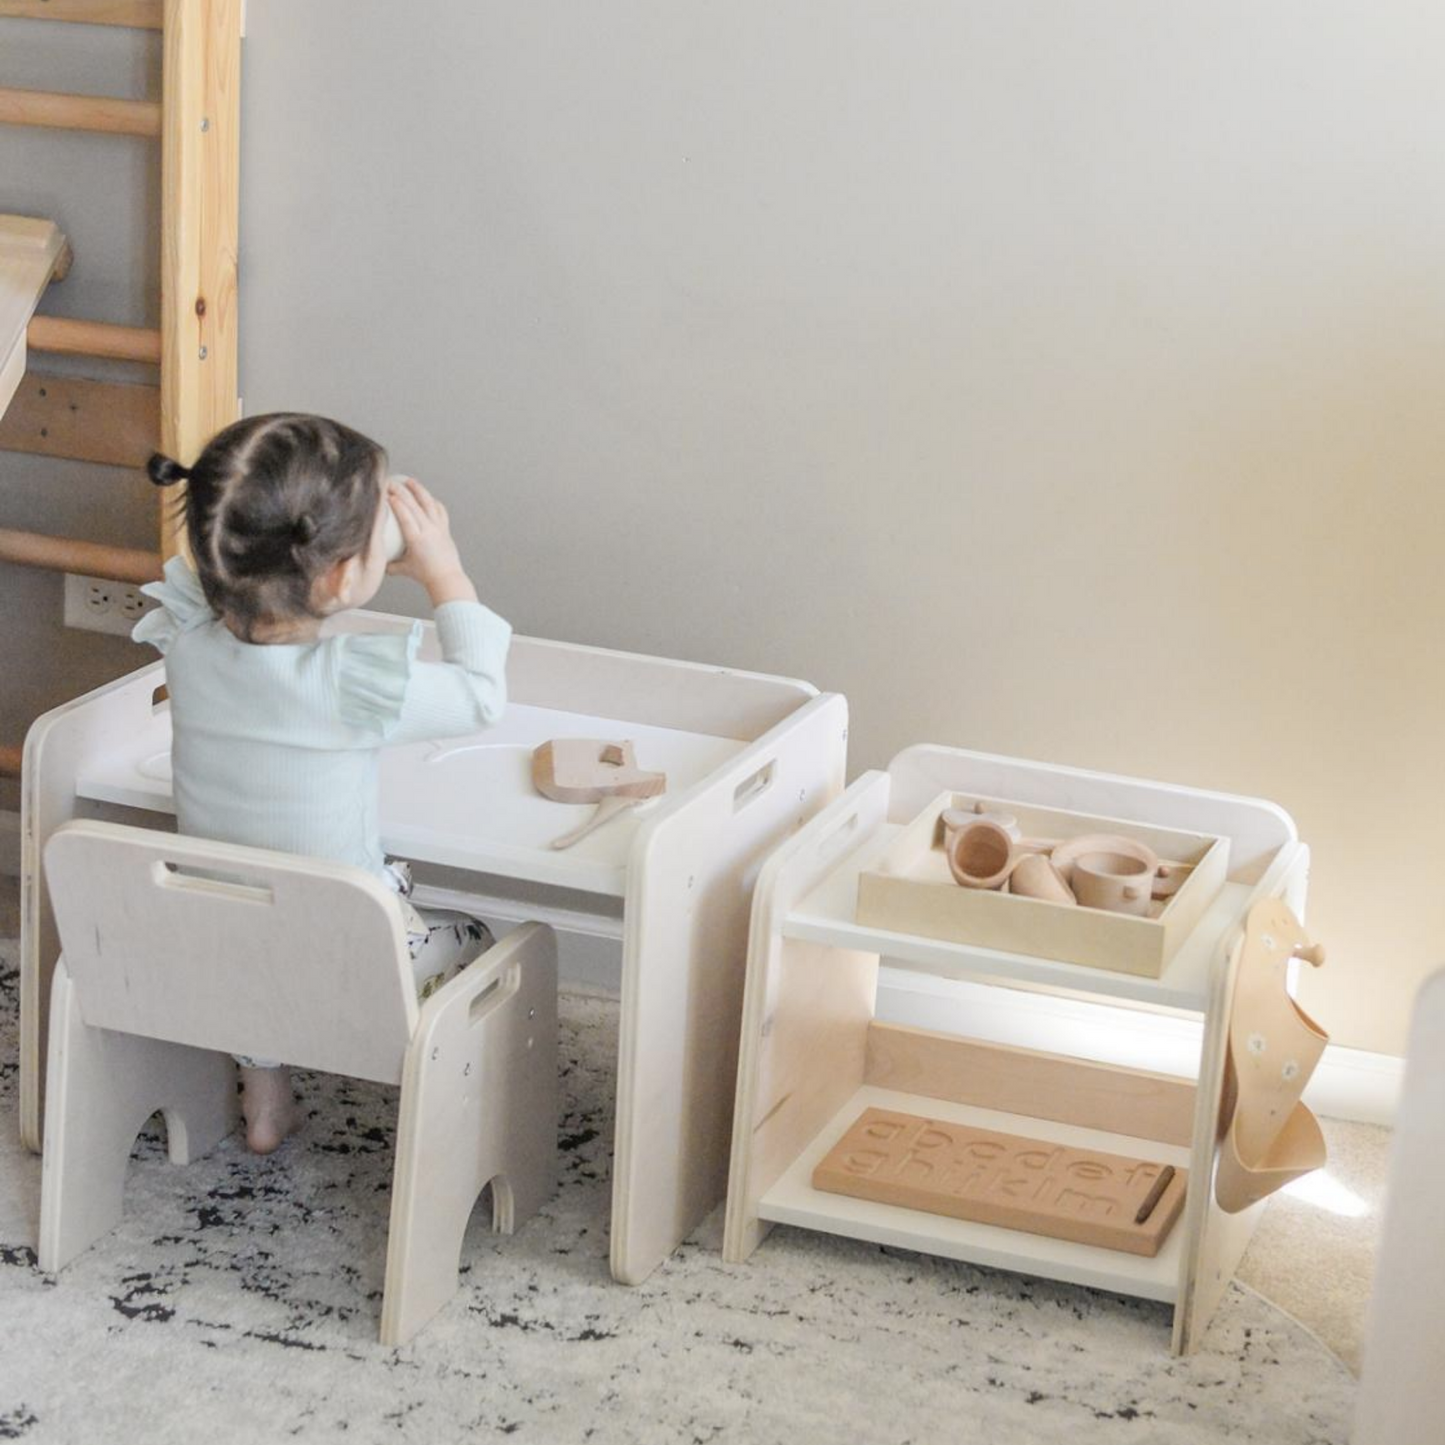 Toddler girl sitting on a wooden montessori chair in front of wooden montessori weaning table drinking from cup. Beside the table is the Papaya shelf by Sapiens Child . The shelf has a wooden tray with wooden toys and a hook on the side that holds a beige bib.